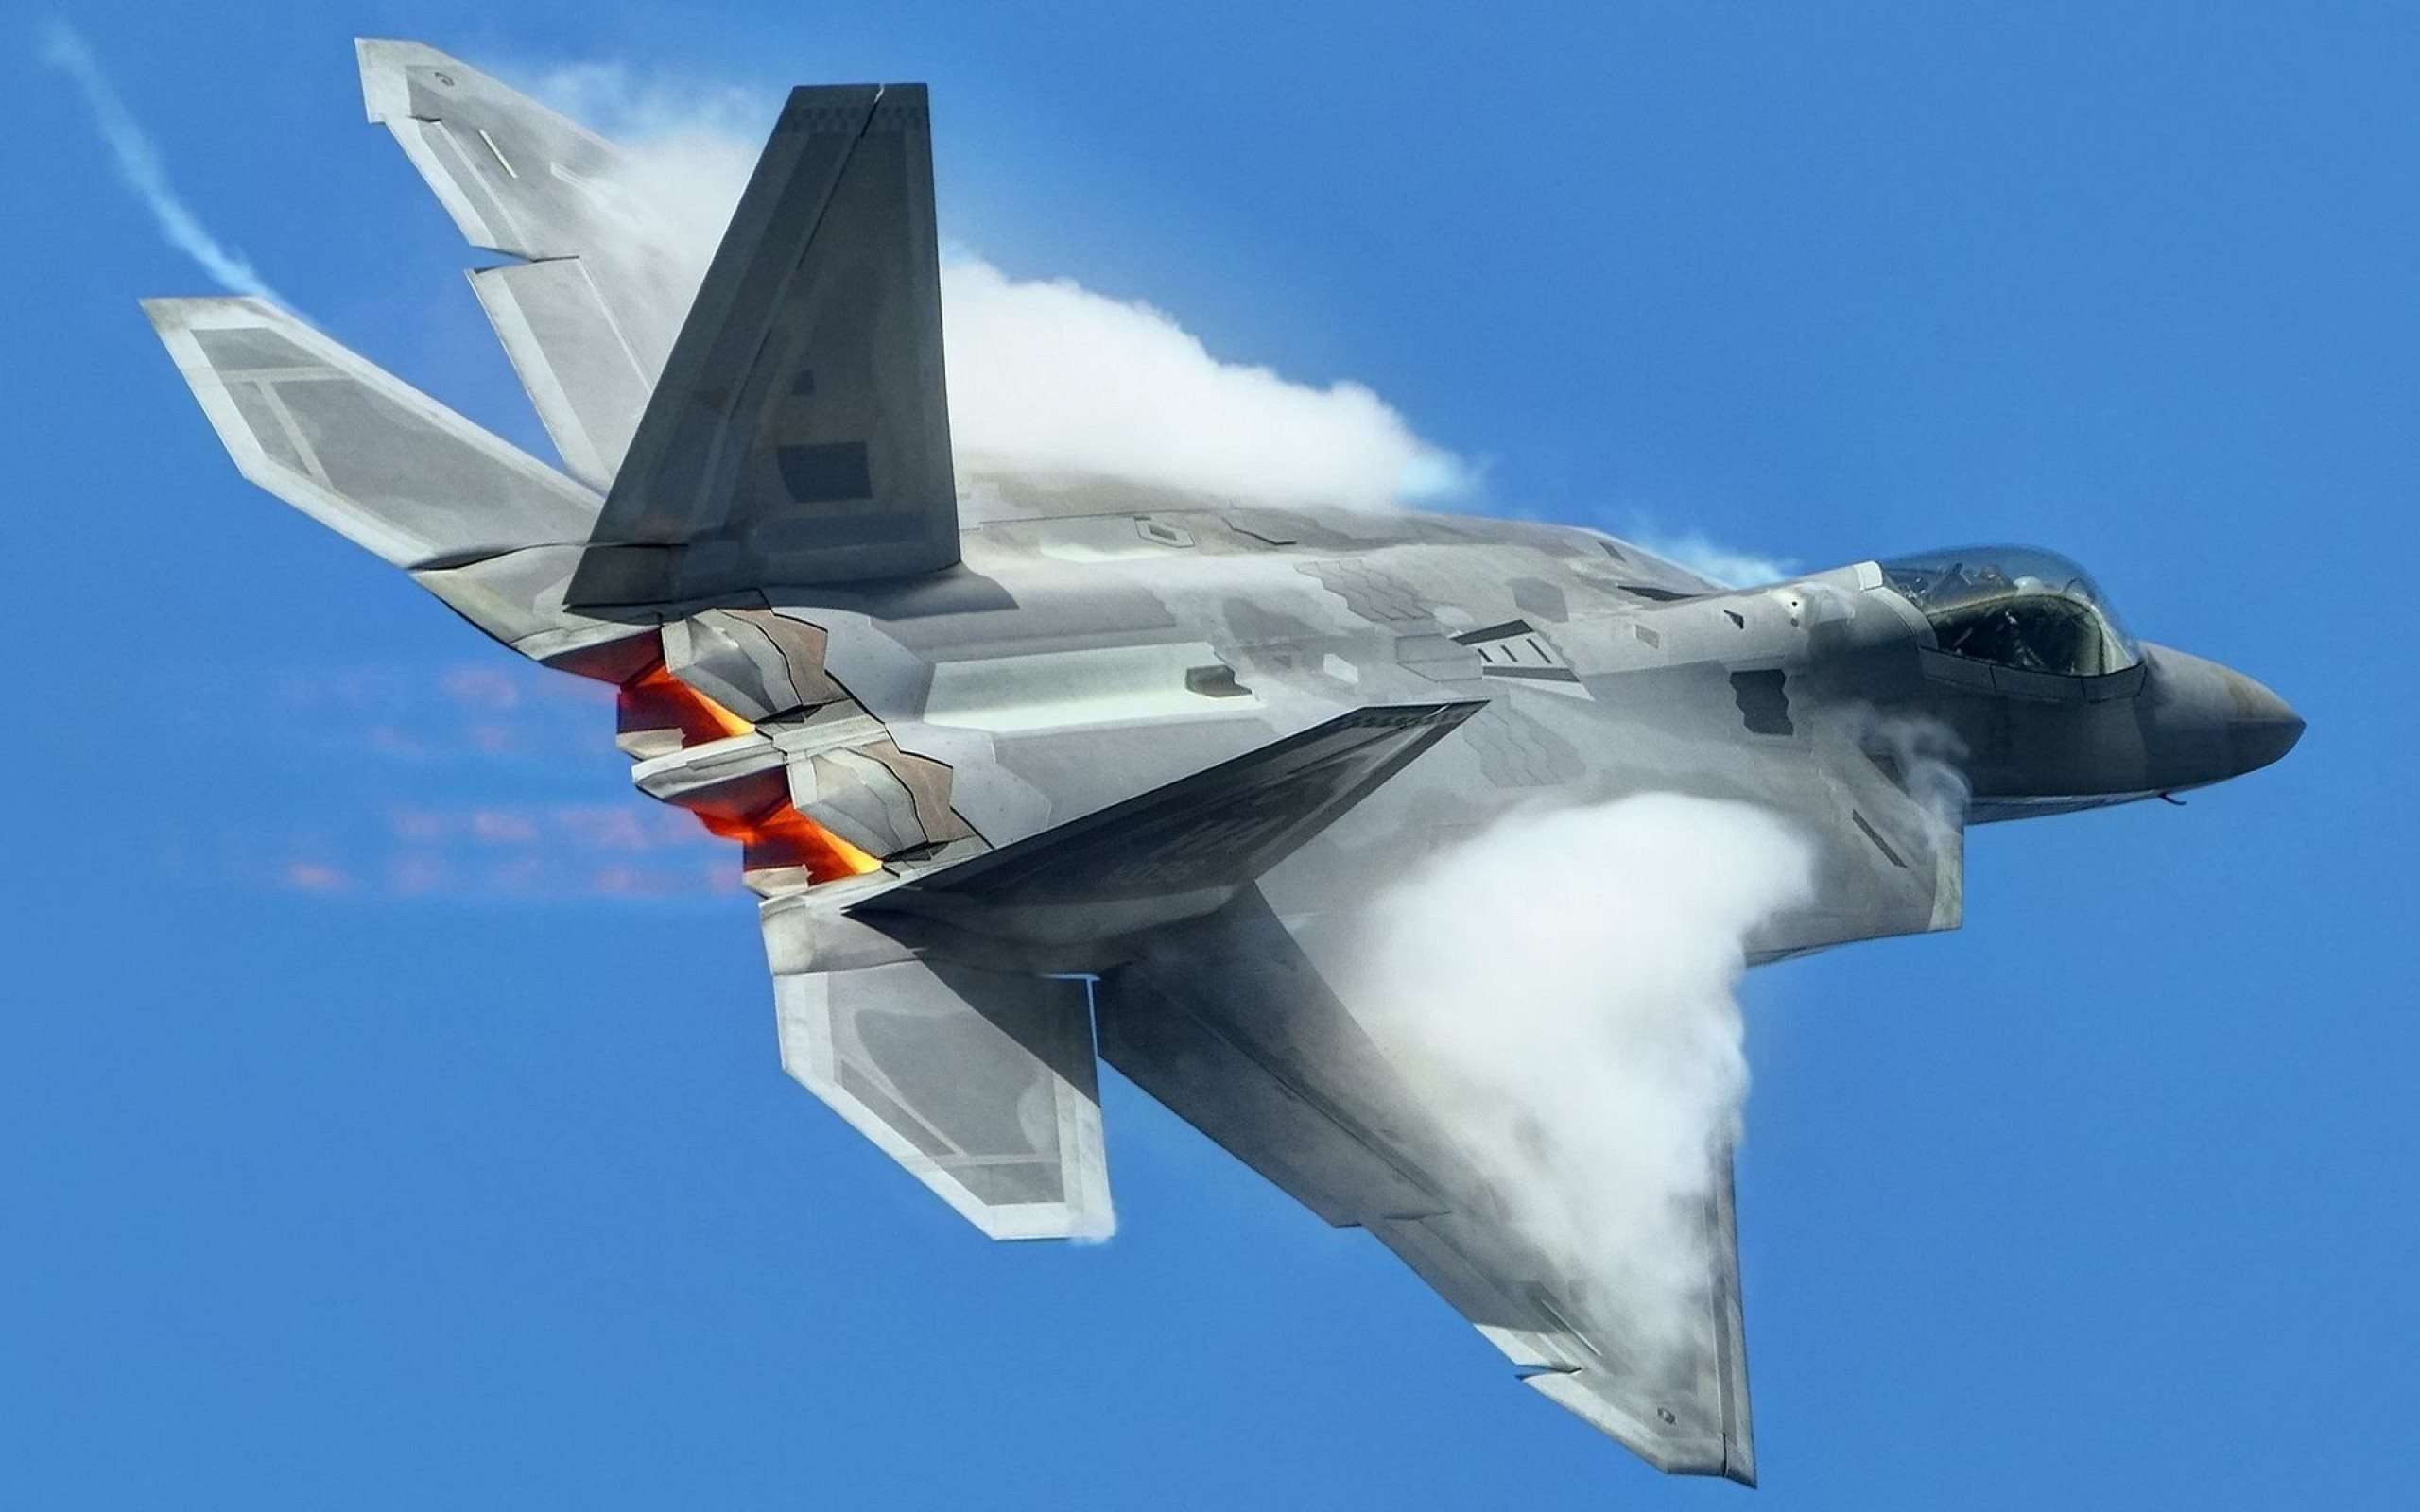 F22 Raptor In The Air Widescreen Wallpaper. High Quality PC